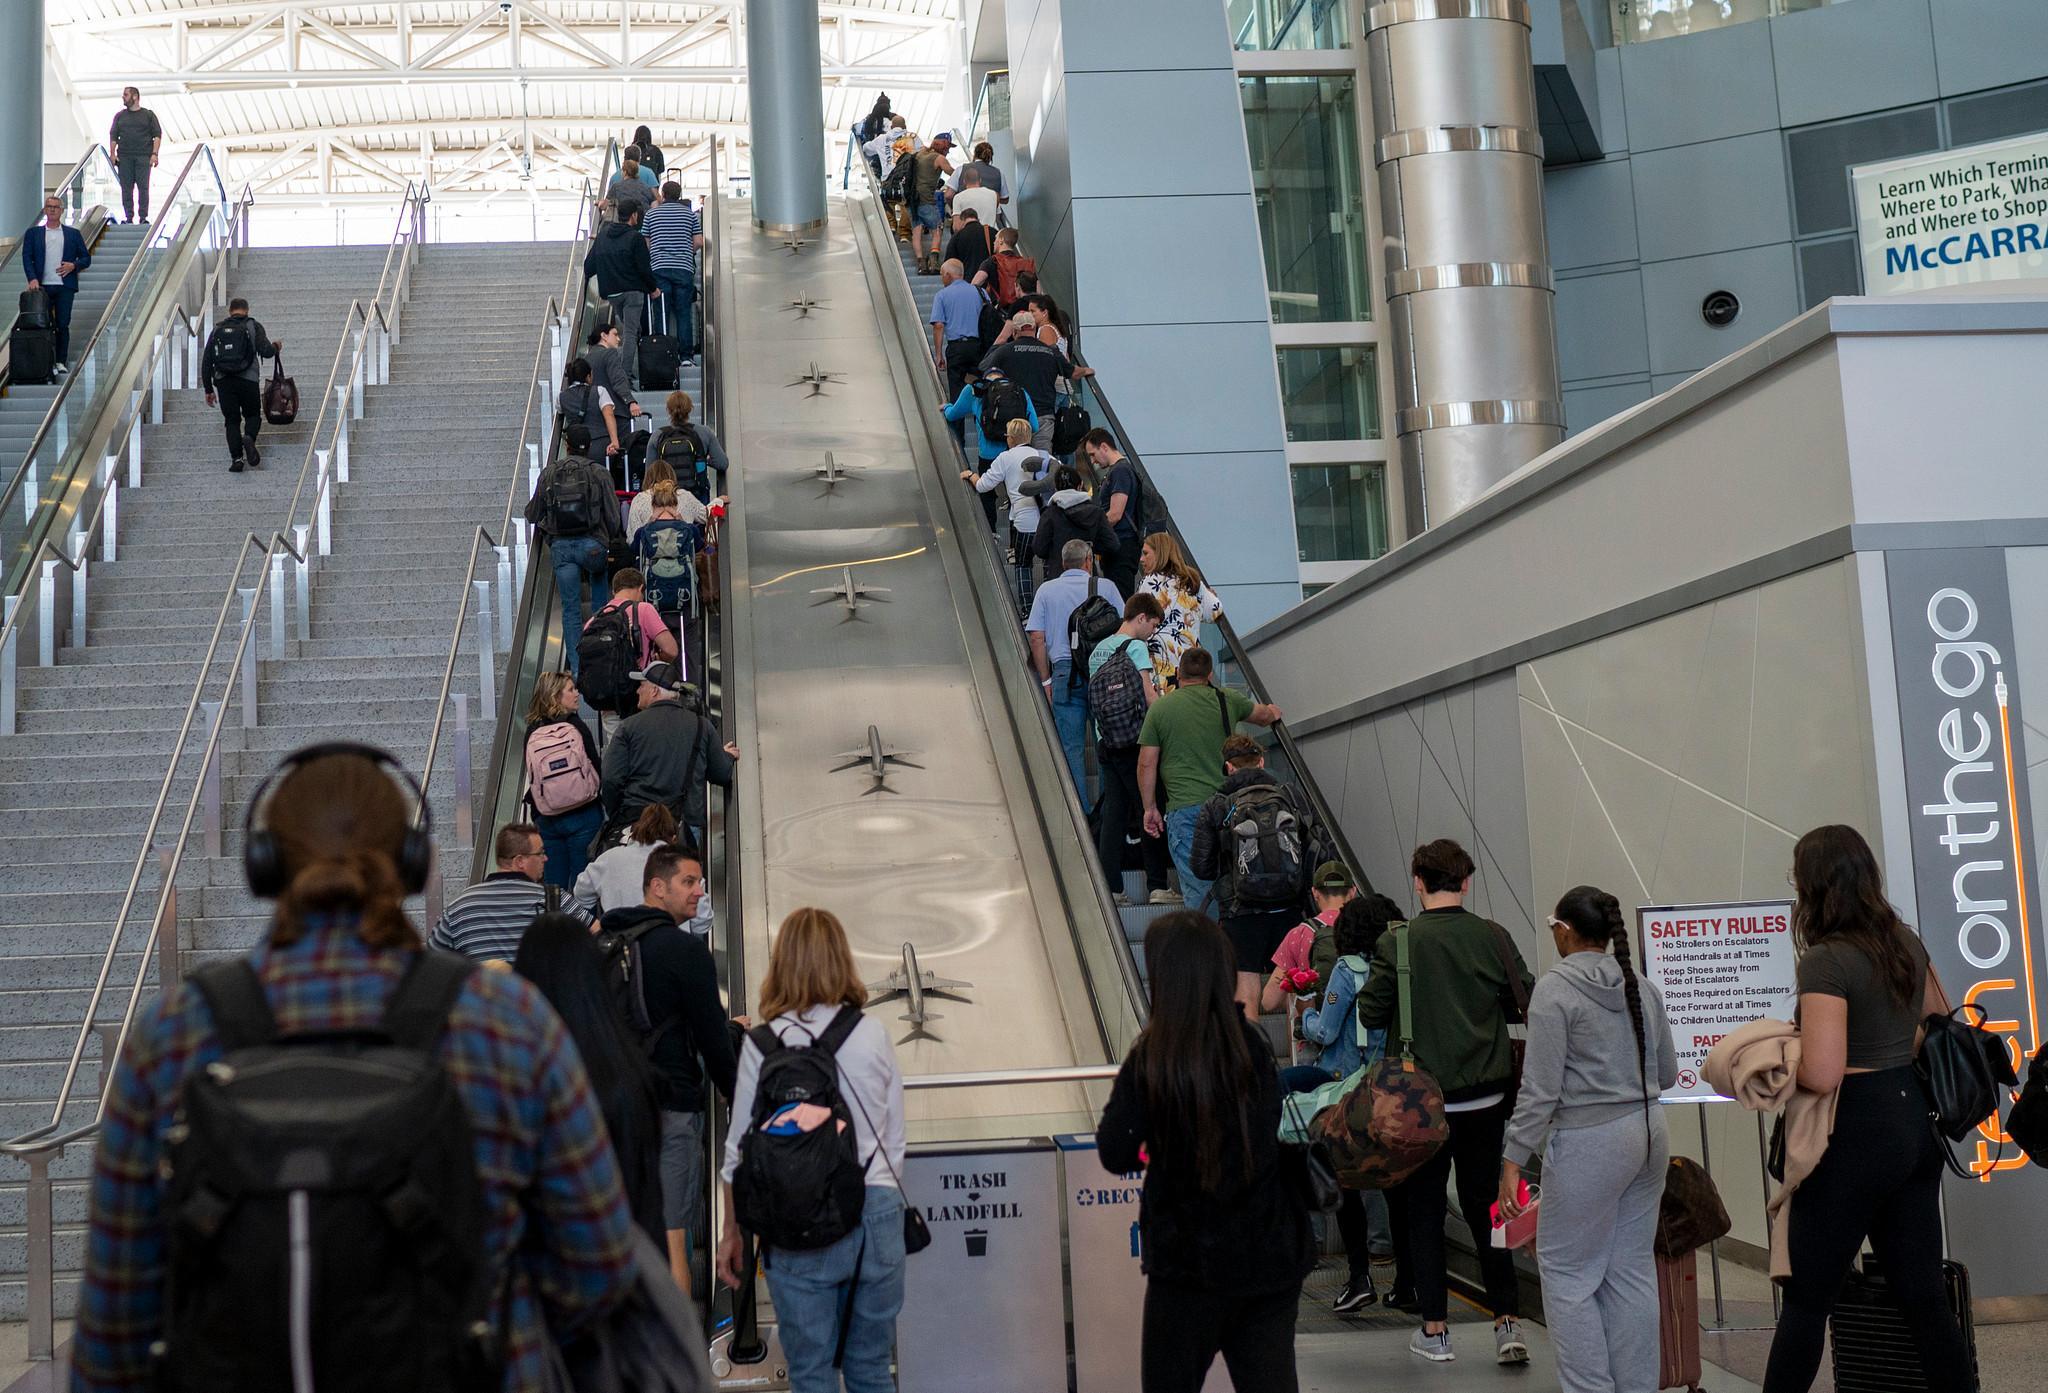 Airline passengers head to their flights at the Harry Reid International Airport in Las Vegas, Nevada. Hotel industry analysts said that while there's ongoing economic uncertainty, hotel industry fundamentals remain strong because people are still traveling for leisure and work. (Getty Images)